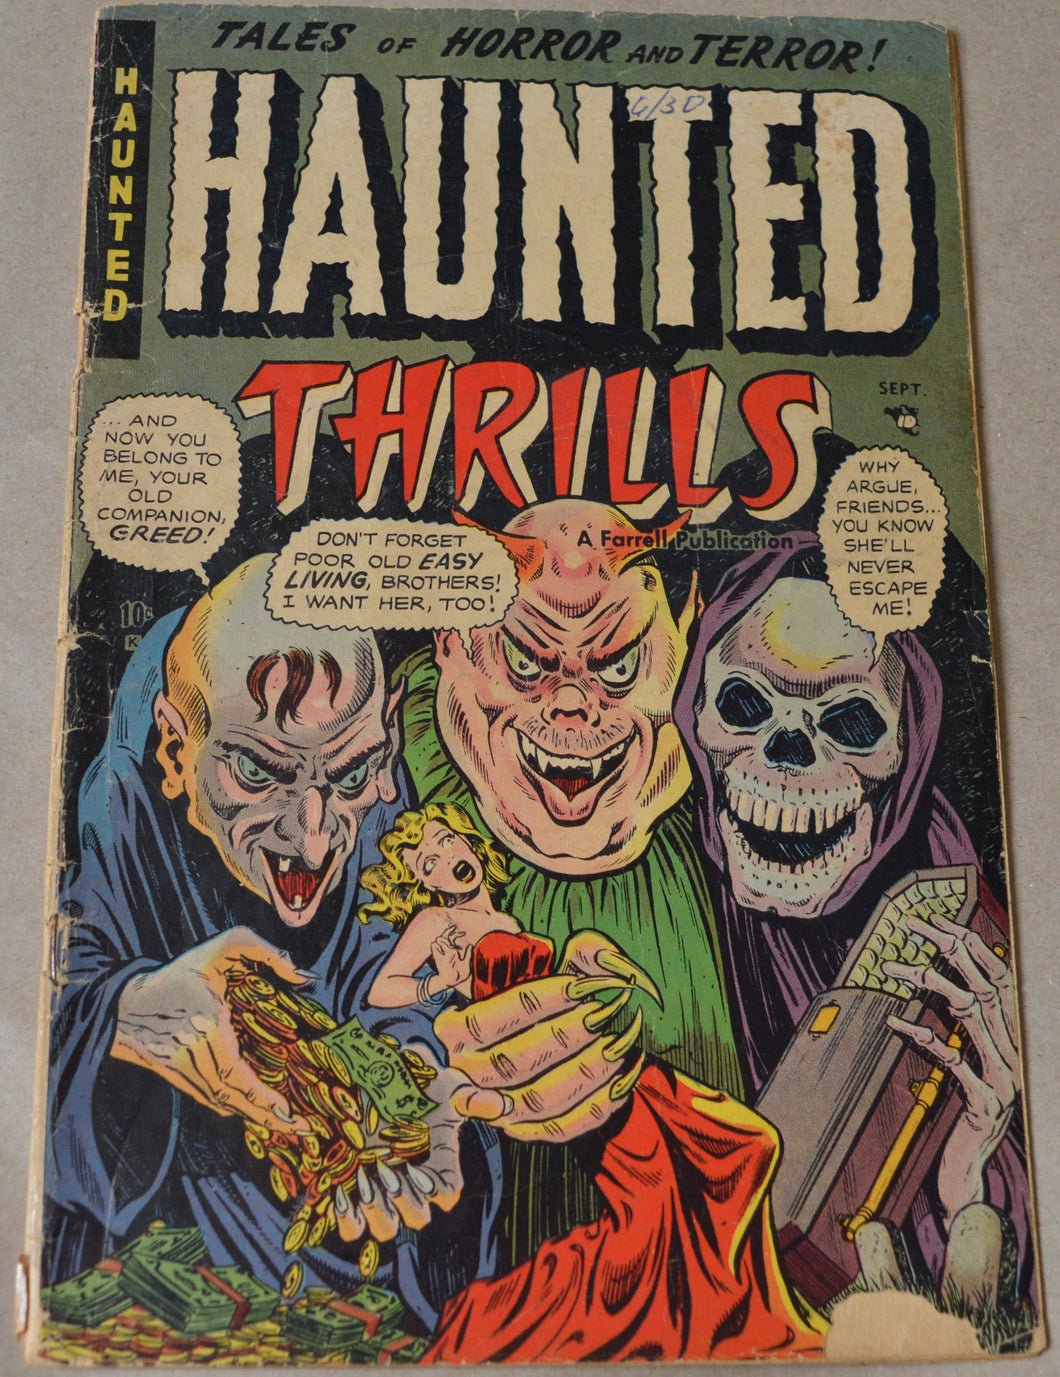 HAUNTED THRILLS #11 (Farrell, 1953) Nazi death camp story. GOLDEN AGE HORROR.